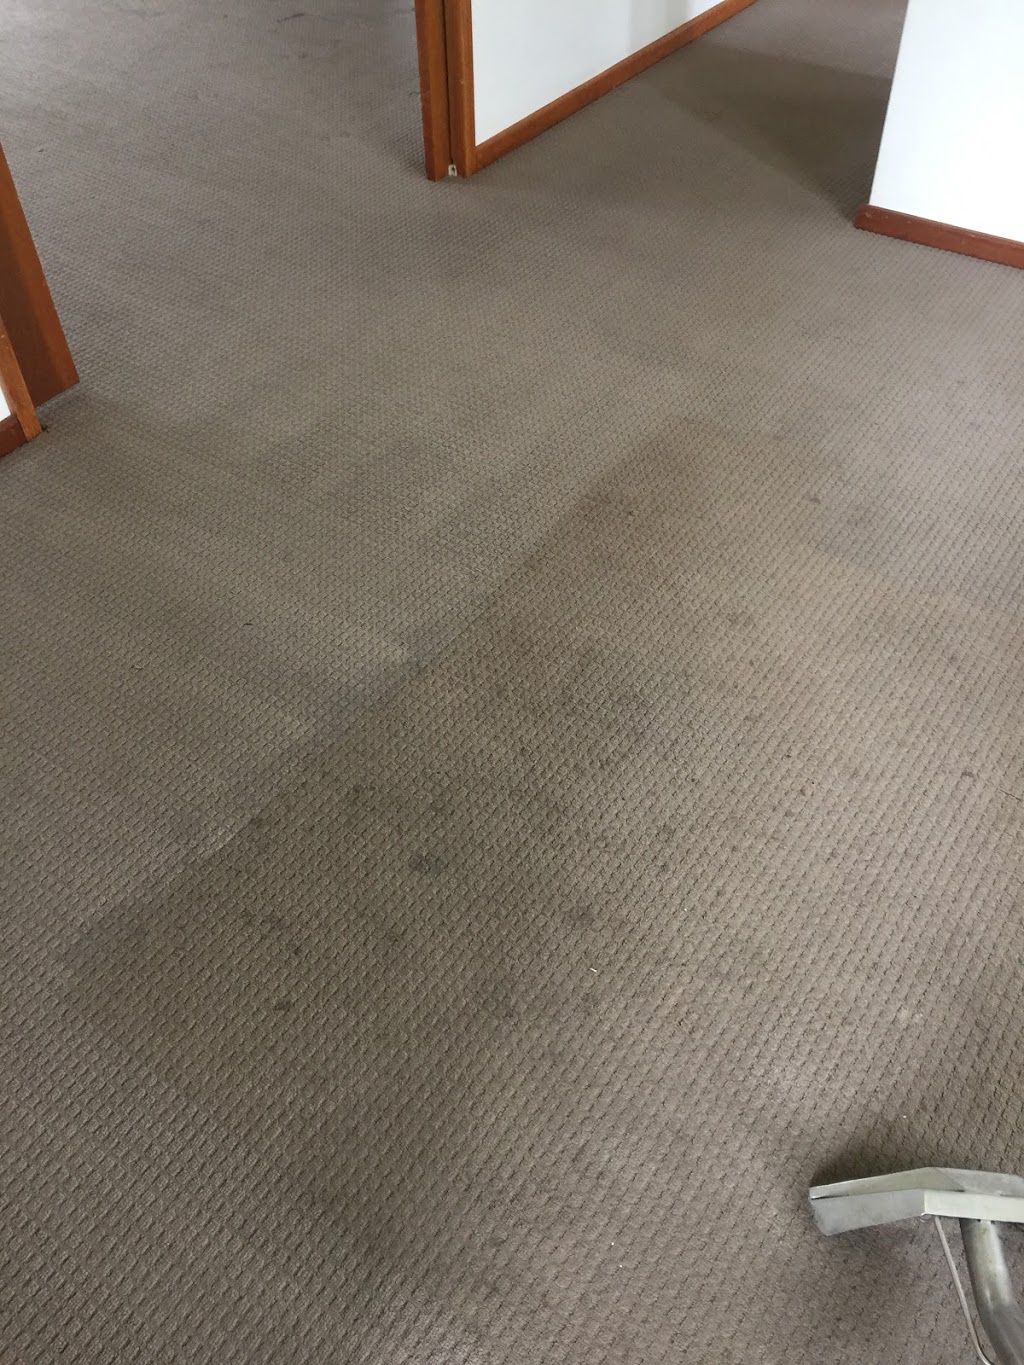 Empire carpet cleaning | 44 Green Point Dr, Belmont NSW 2280, Australia | Phone: 0488 756 369